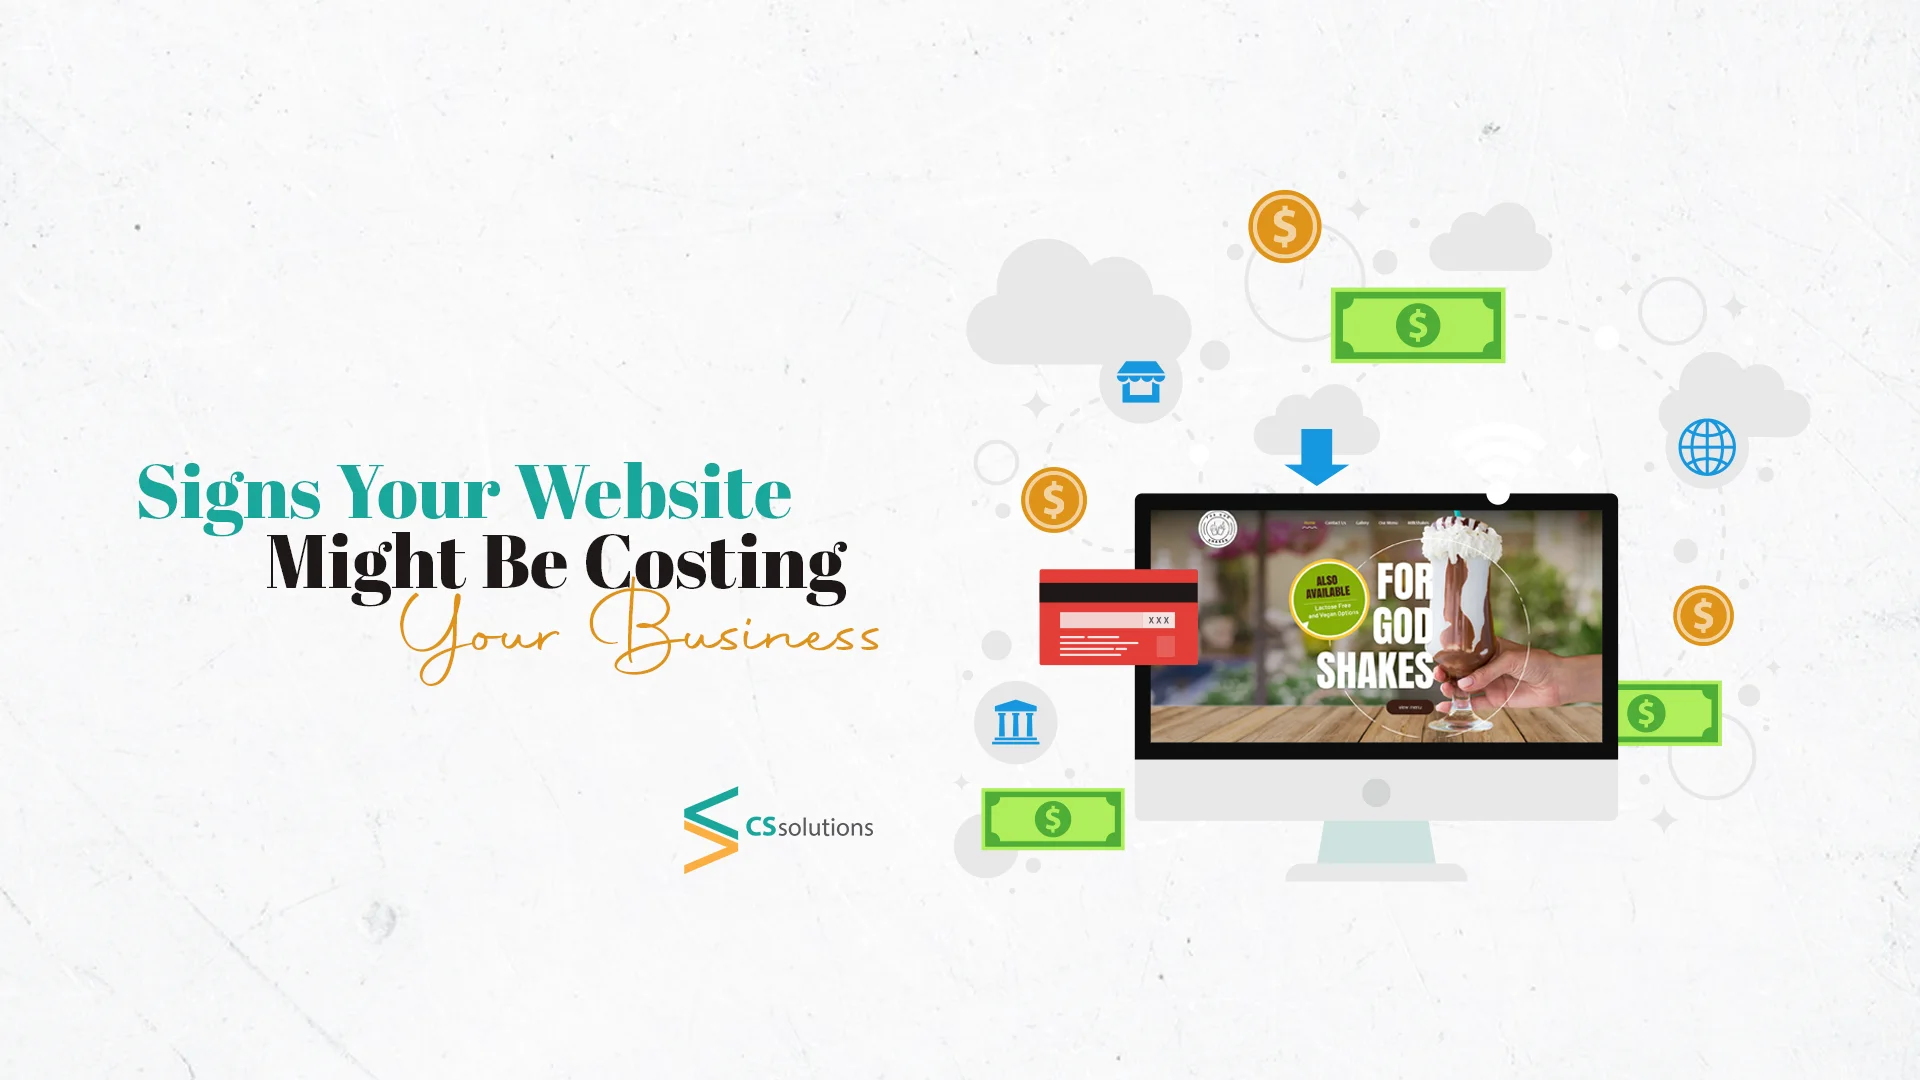 Signs Your Website Might Be Costing Your Business